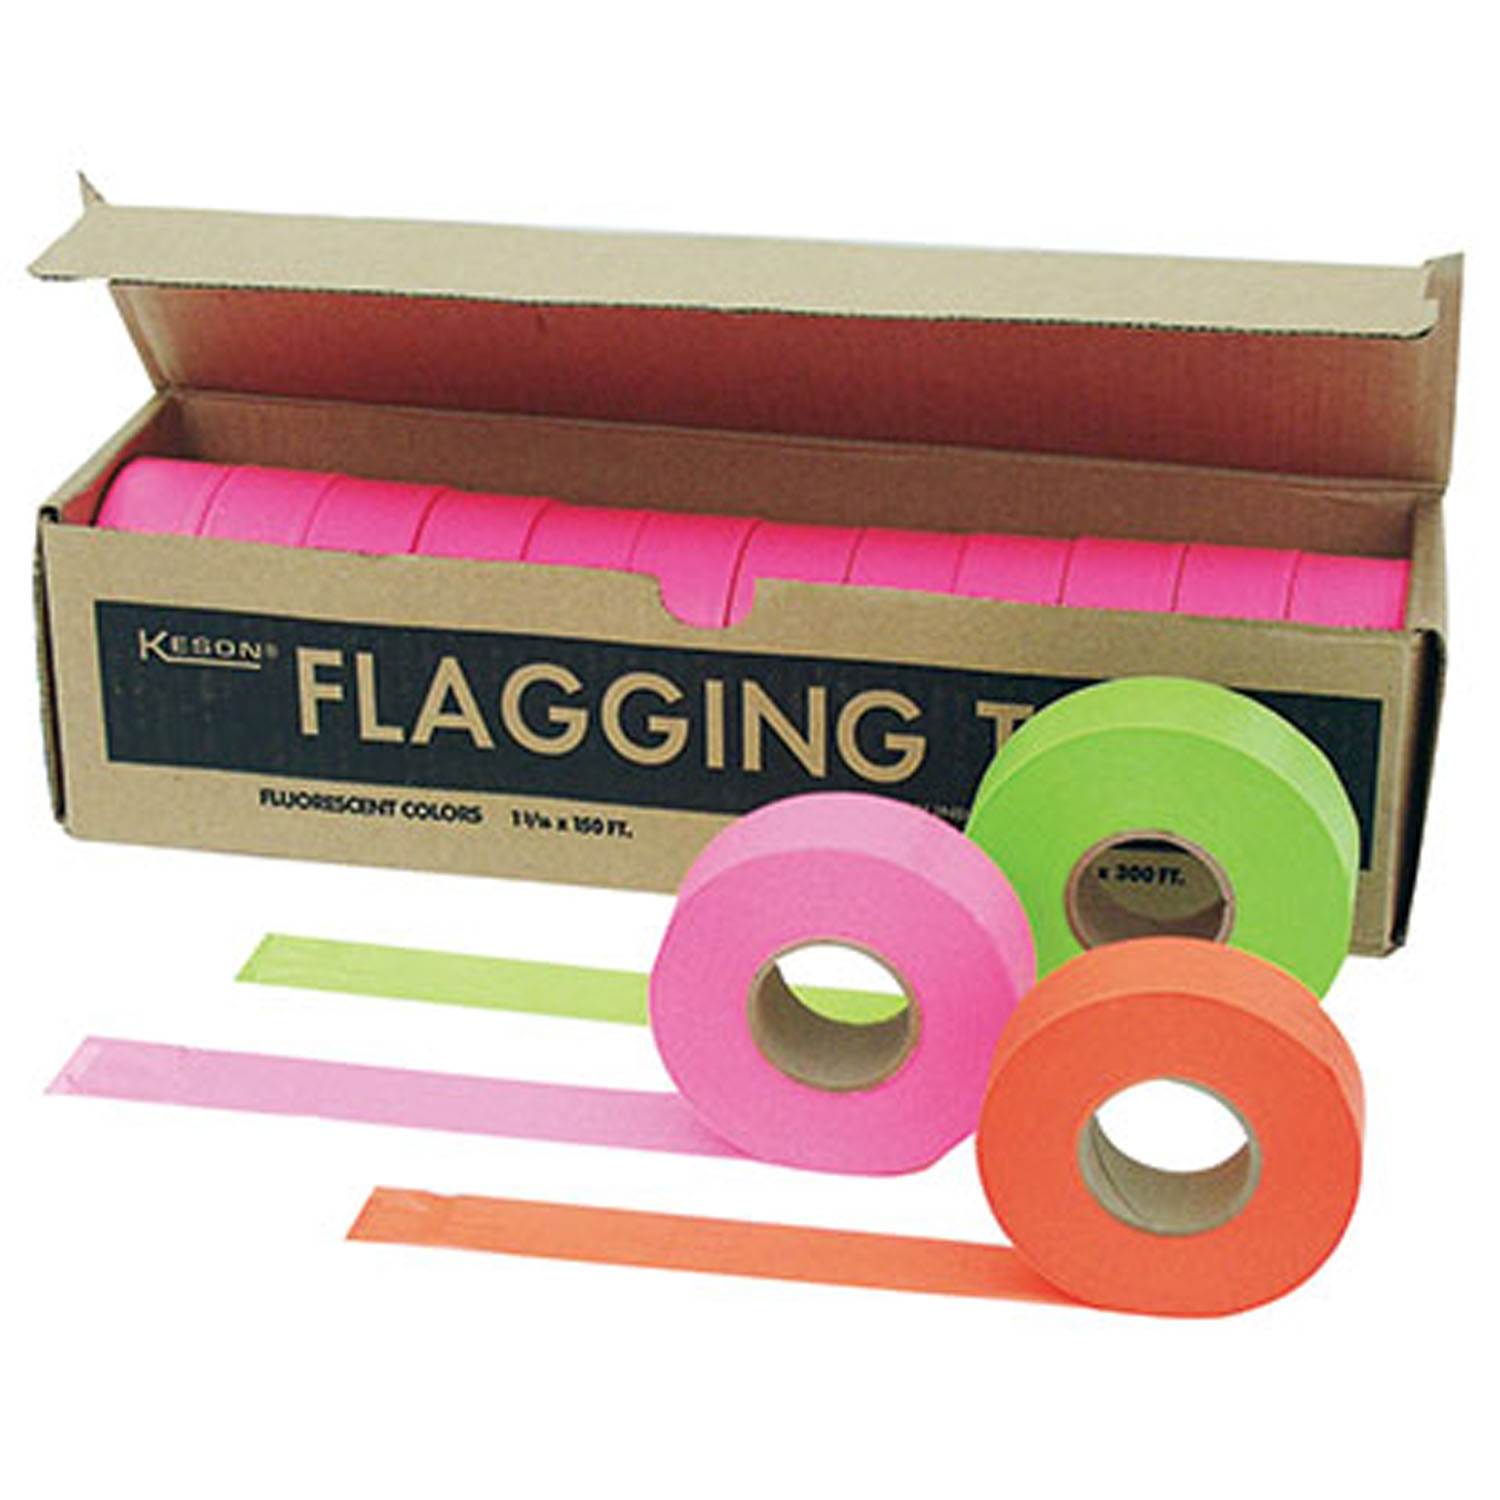 GLO-PINK FLAGGING TAPE 1-3/16